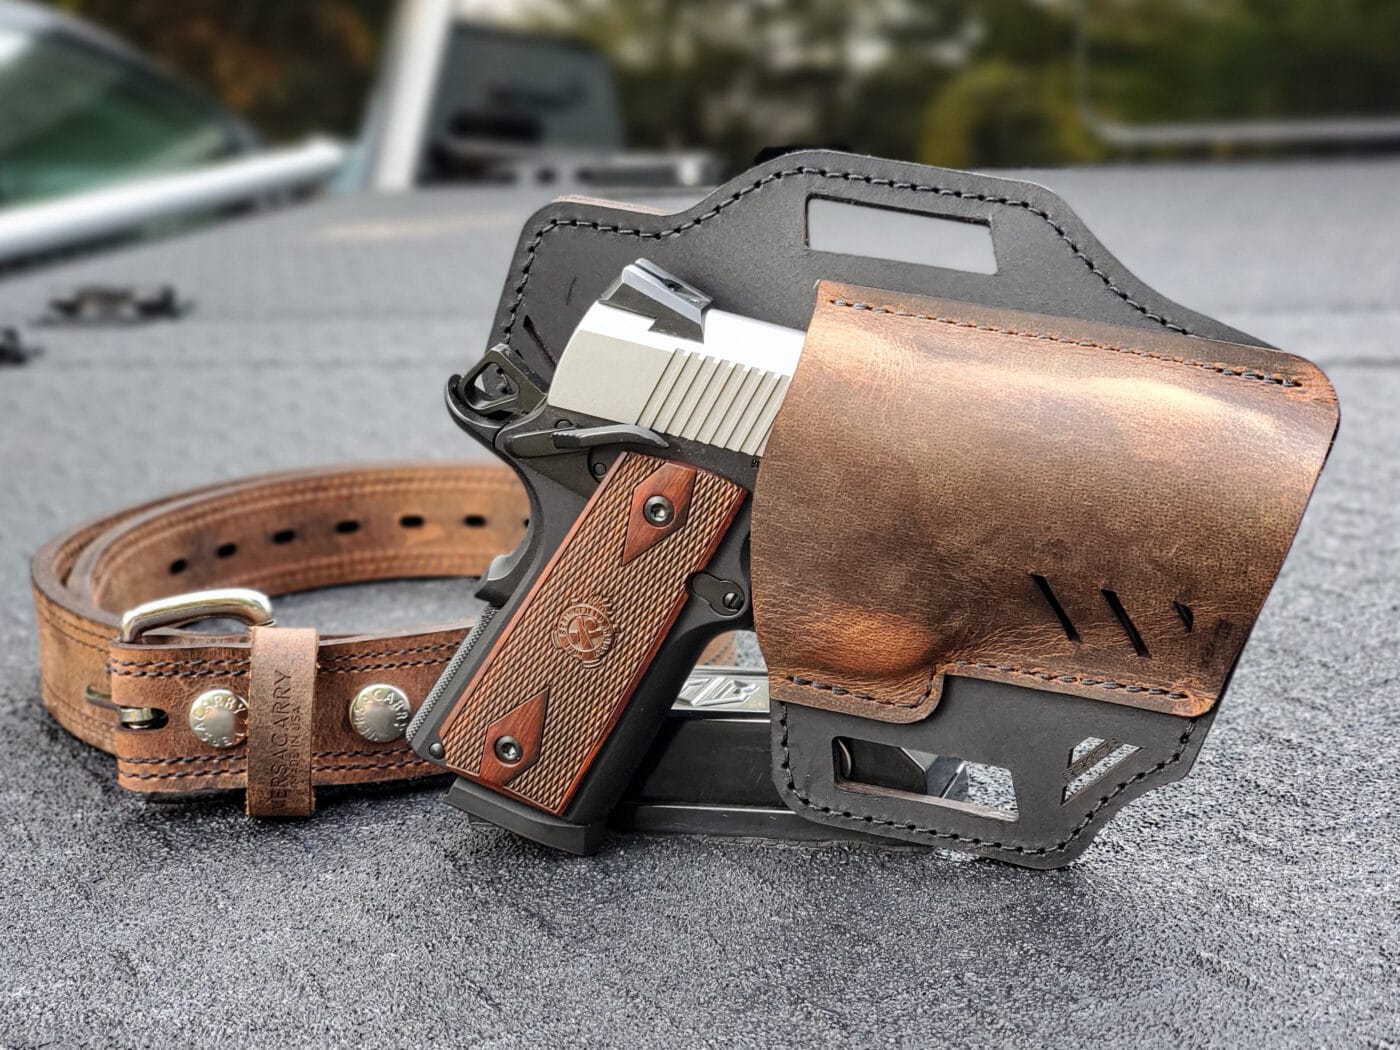 Versacarry Rough Rider and belt with 1911 pistol